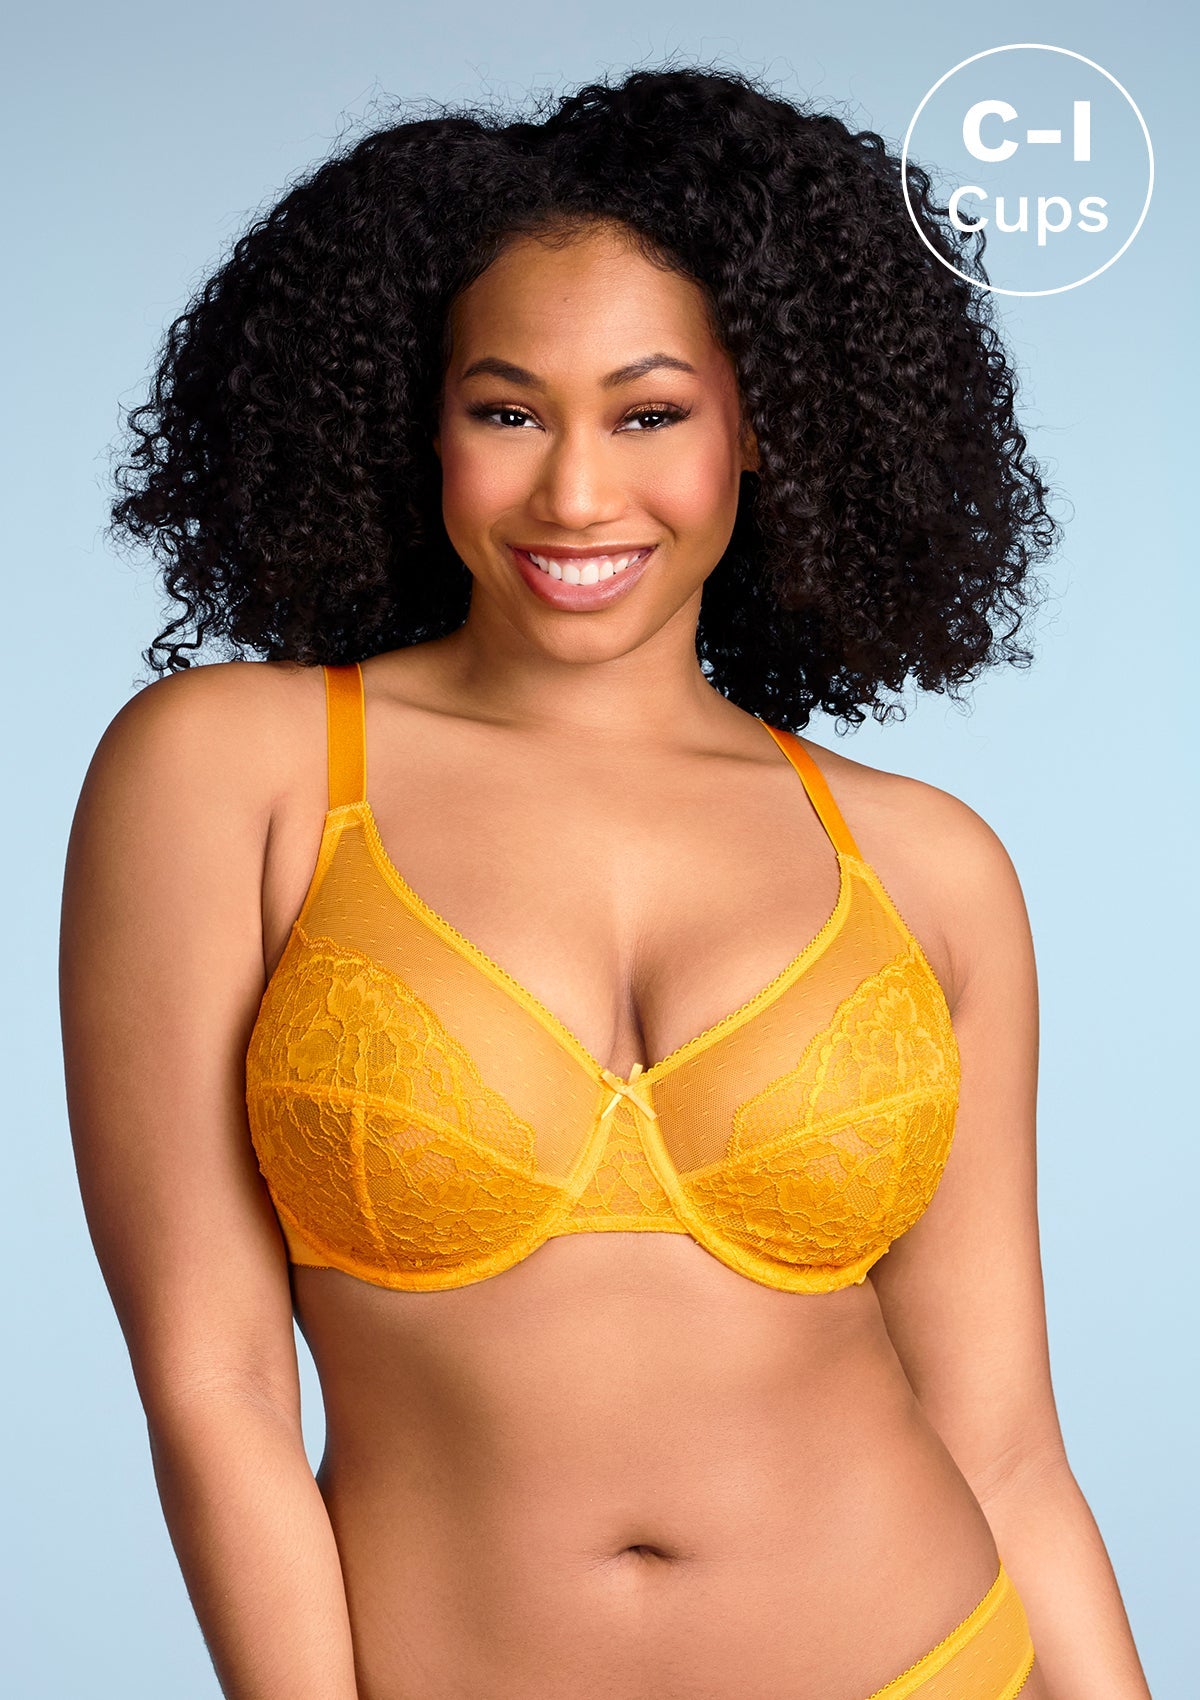 HSIA Enchante Bra And Panty Sets: Unpadded Bra With Back Support - Cadmium Yellow / 36 / C